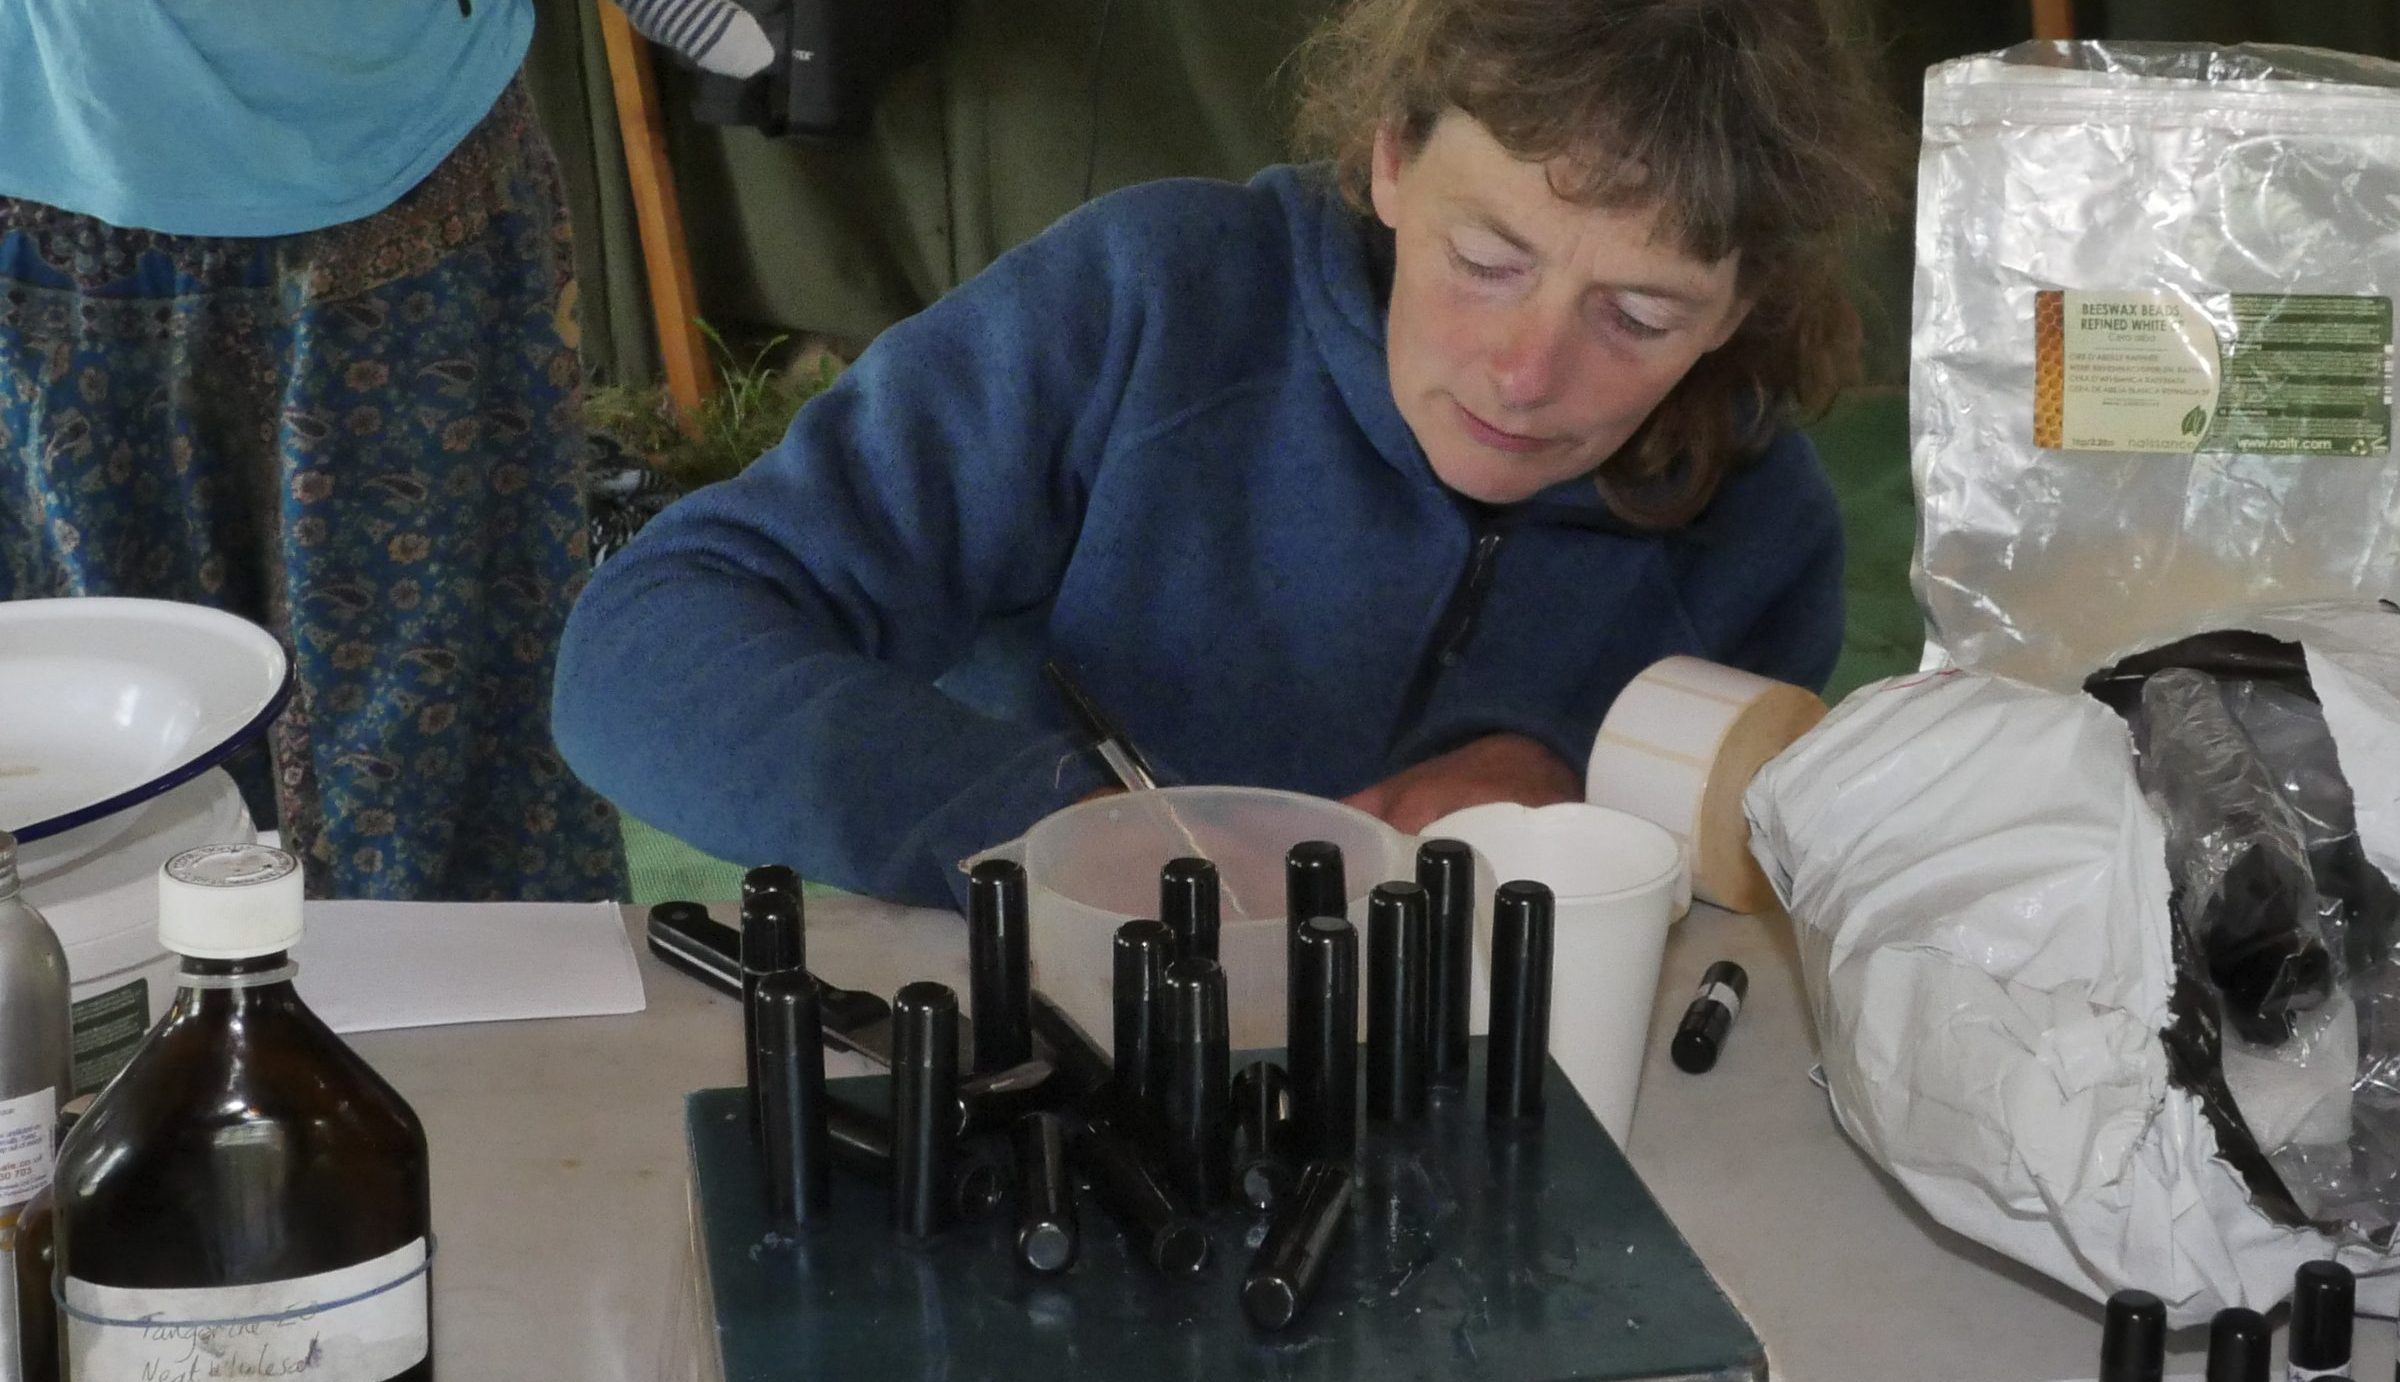 iain stewarts workshop a woman labels and weighs small bottles